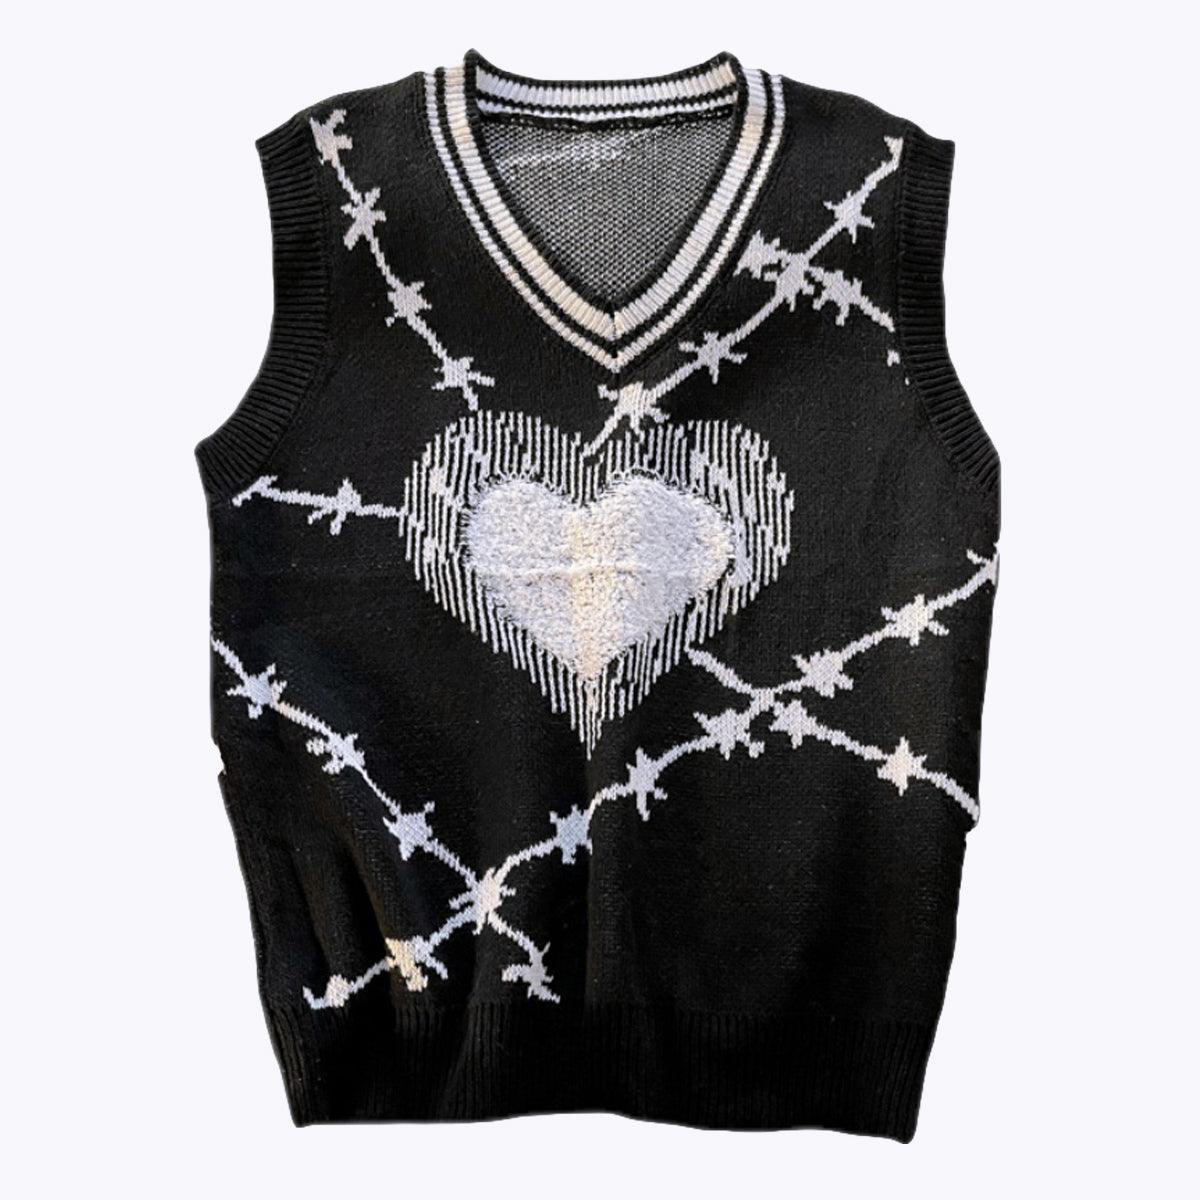 Barbed Wire Knit Vest Grunge Aesthetic - Aesthetic Clothes Shop